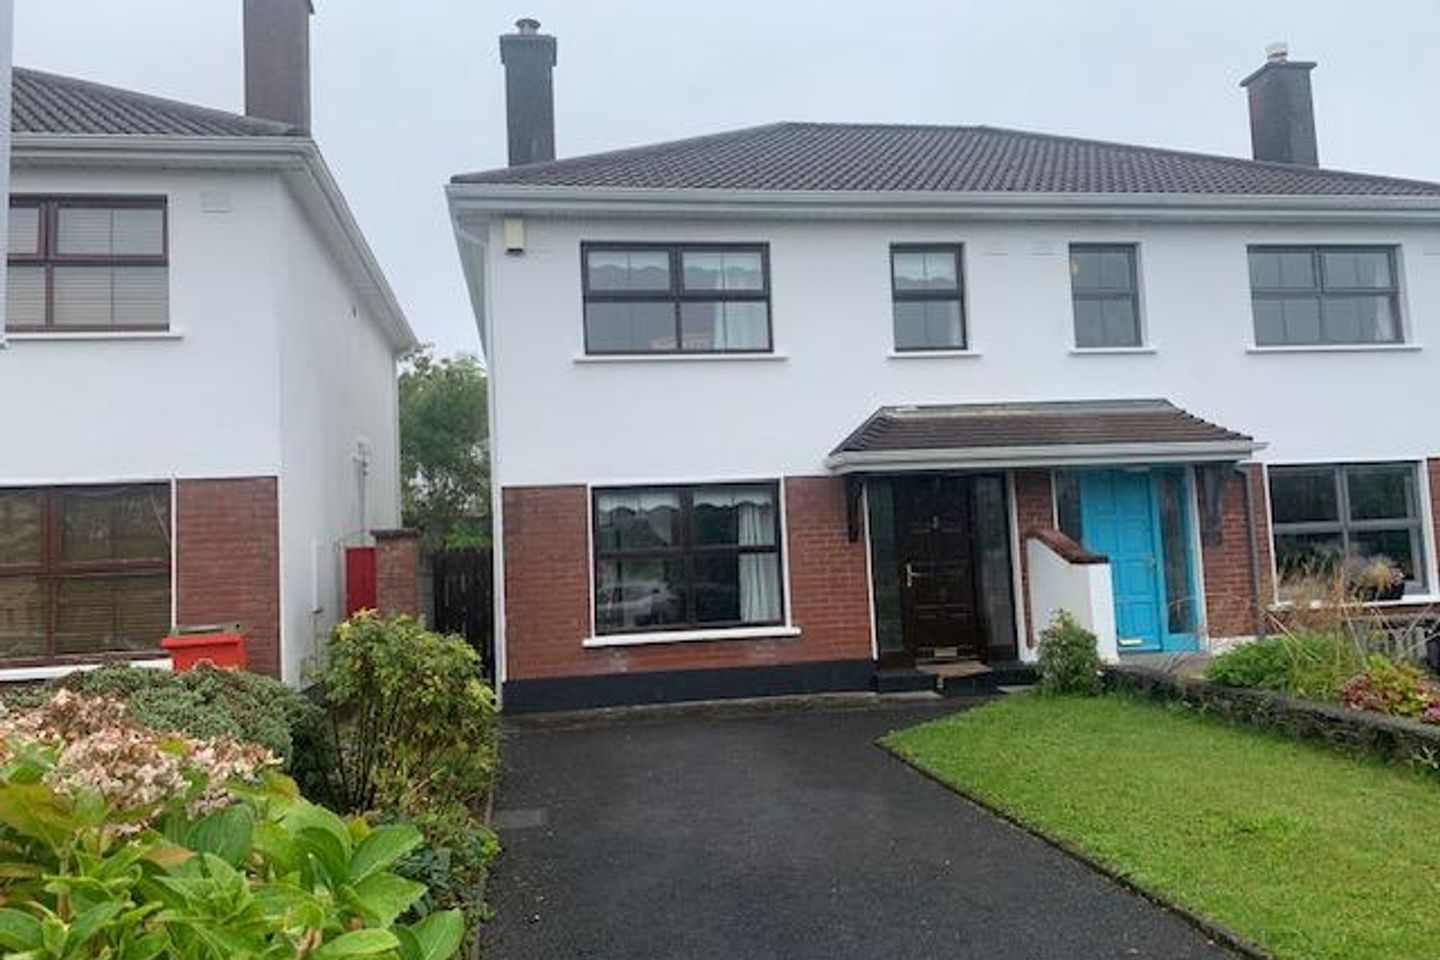 42A Woodfield, Cappagh Road, Cappagh, Co. Galway, H91V3AY